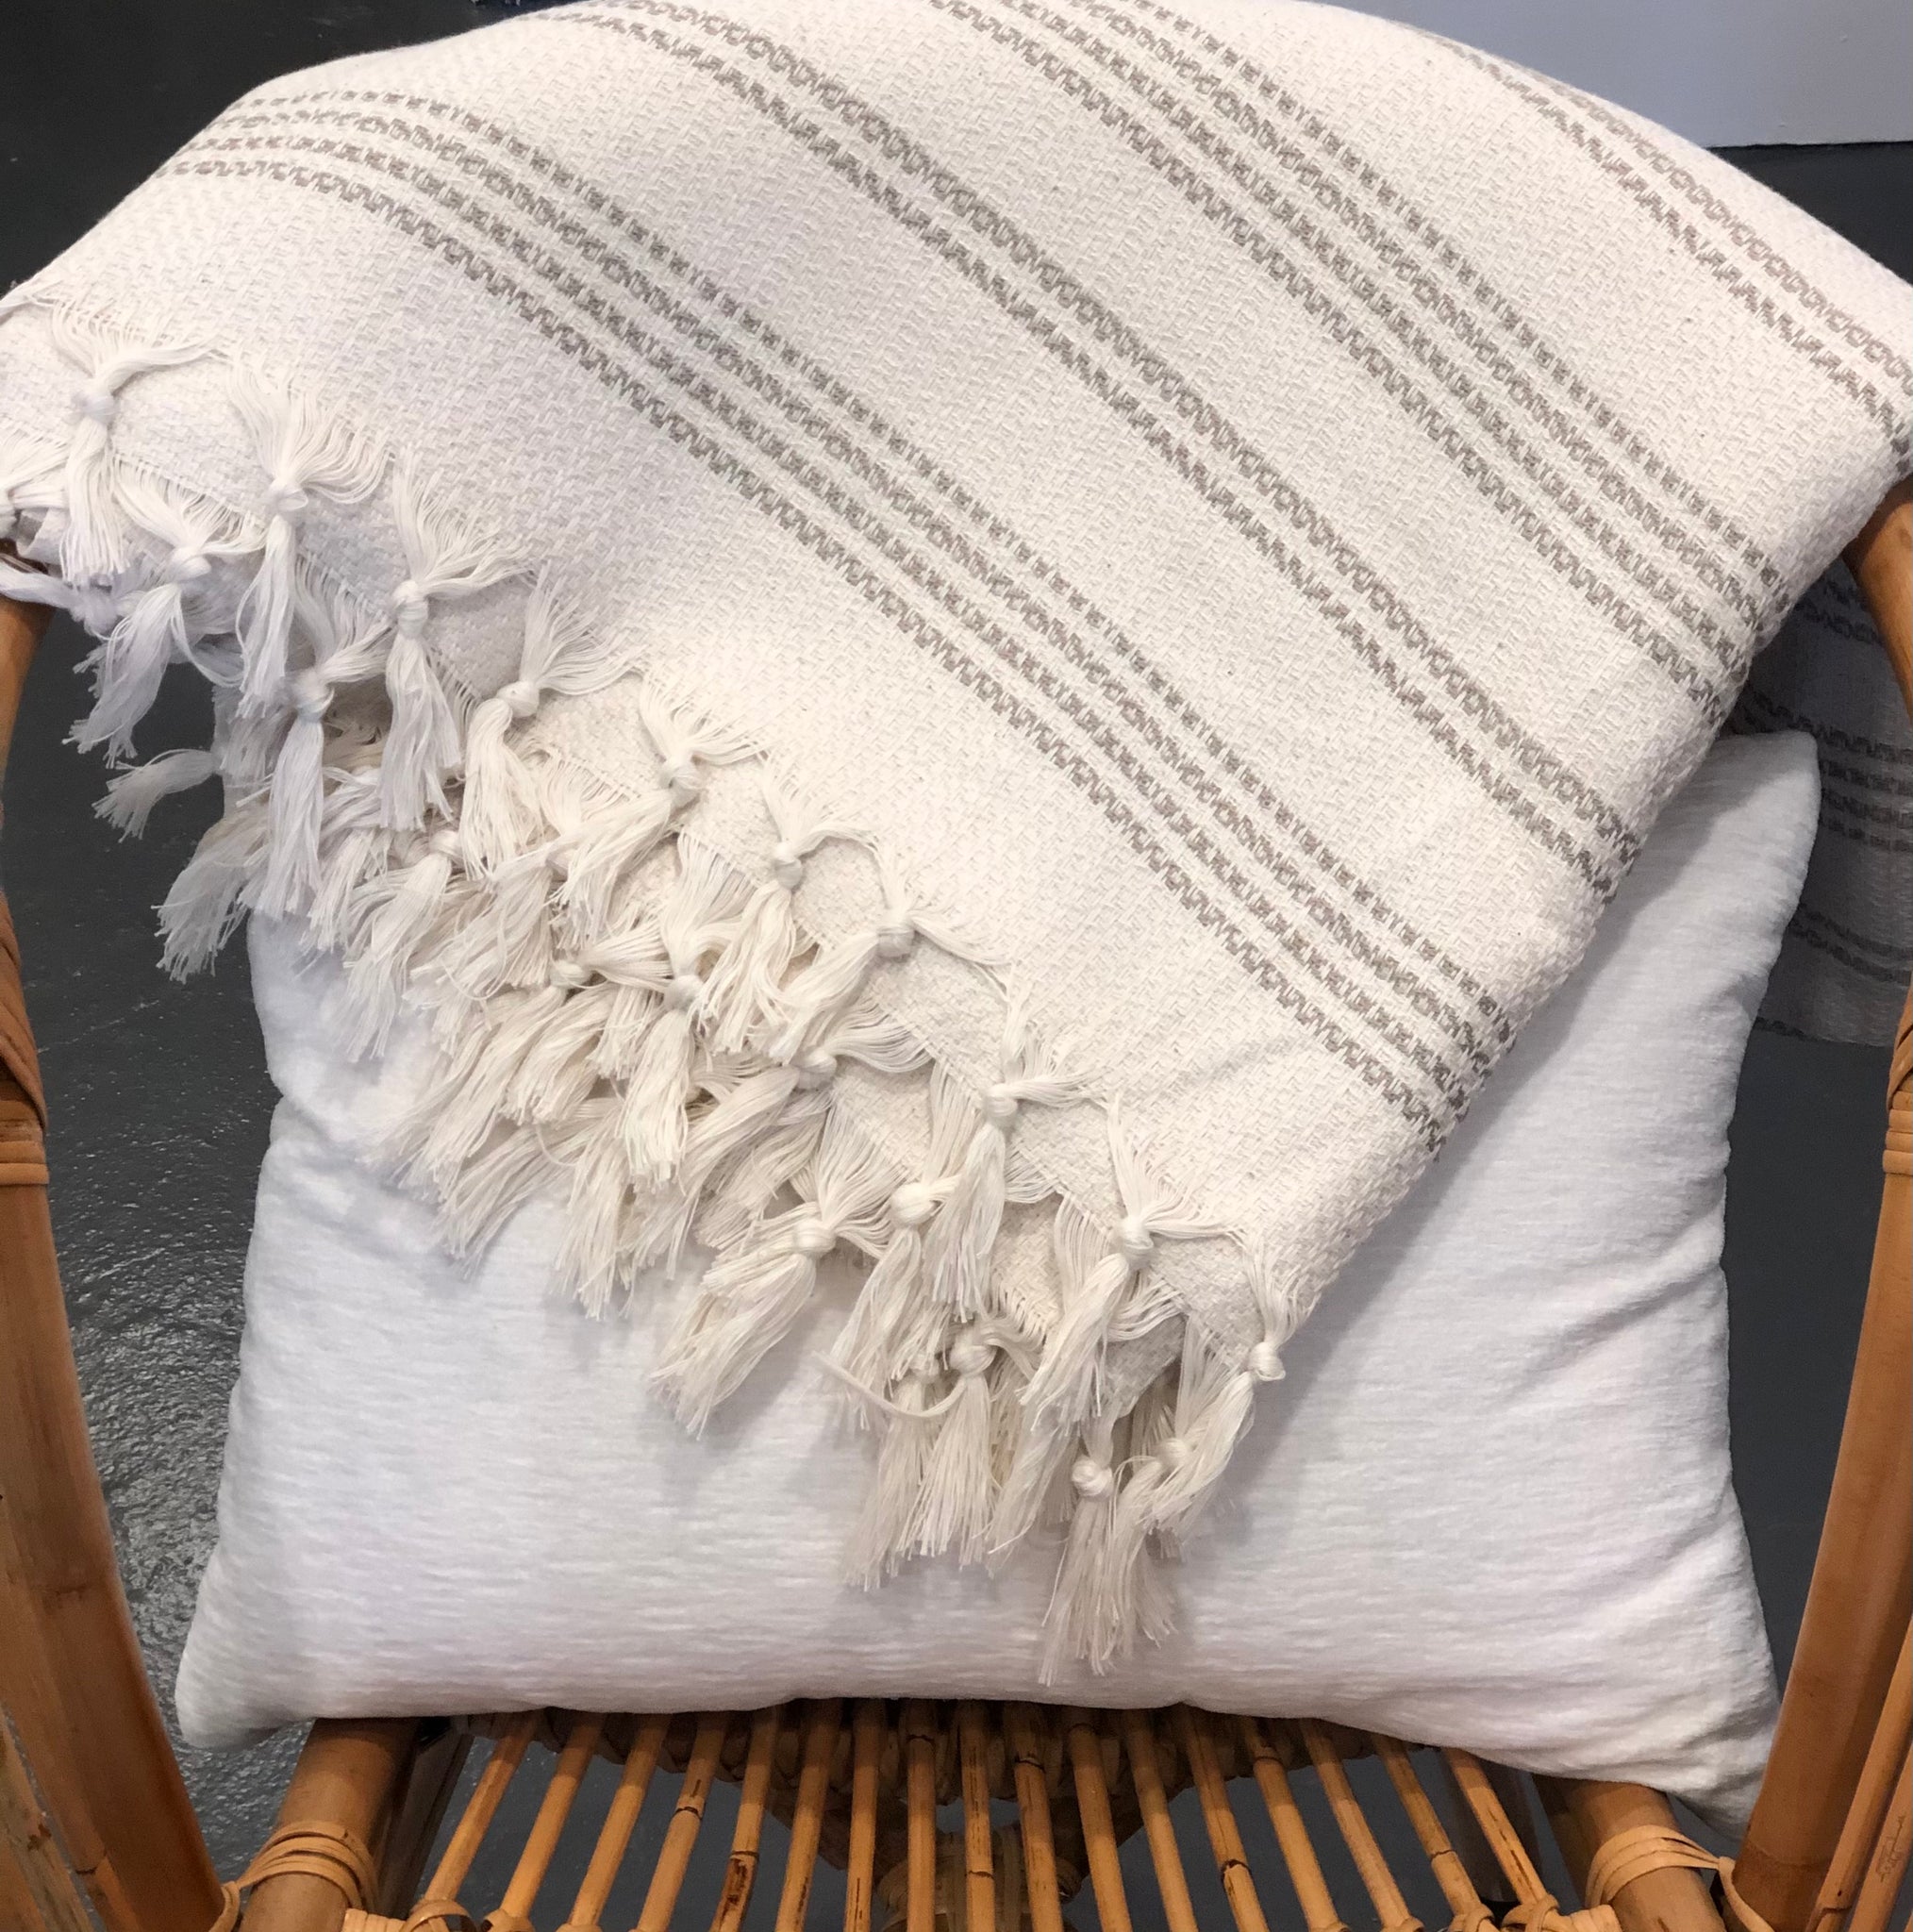 Ready to get cozy? This throw blanket is hand loomed with 100% Turkish cotton, in a stylish striped pattern of tan and natural colors. Turkish cotton is known for its softness, comfort, light weight, hypoallergenic, and antimicrobial properties. It can be used as a throw blanket on a bed, couch, picnic, or even at the beach! Get ready to stay warm and comfy! Fair trade. Measure 71"x 94.5". XL King size.